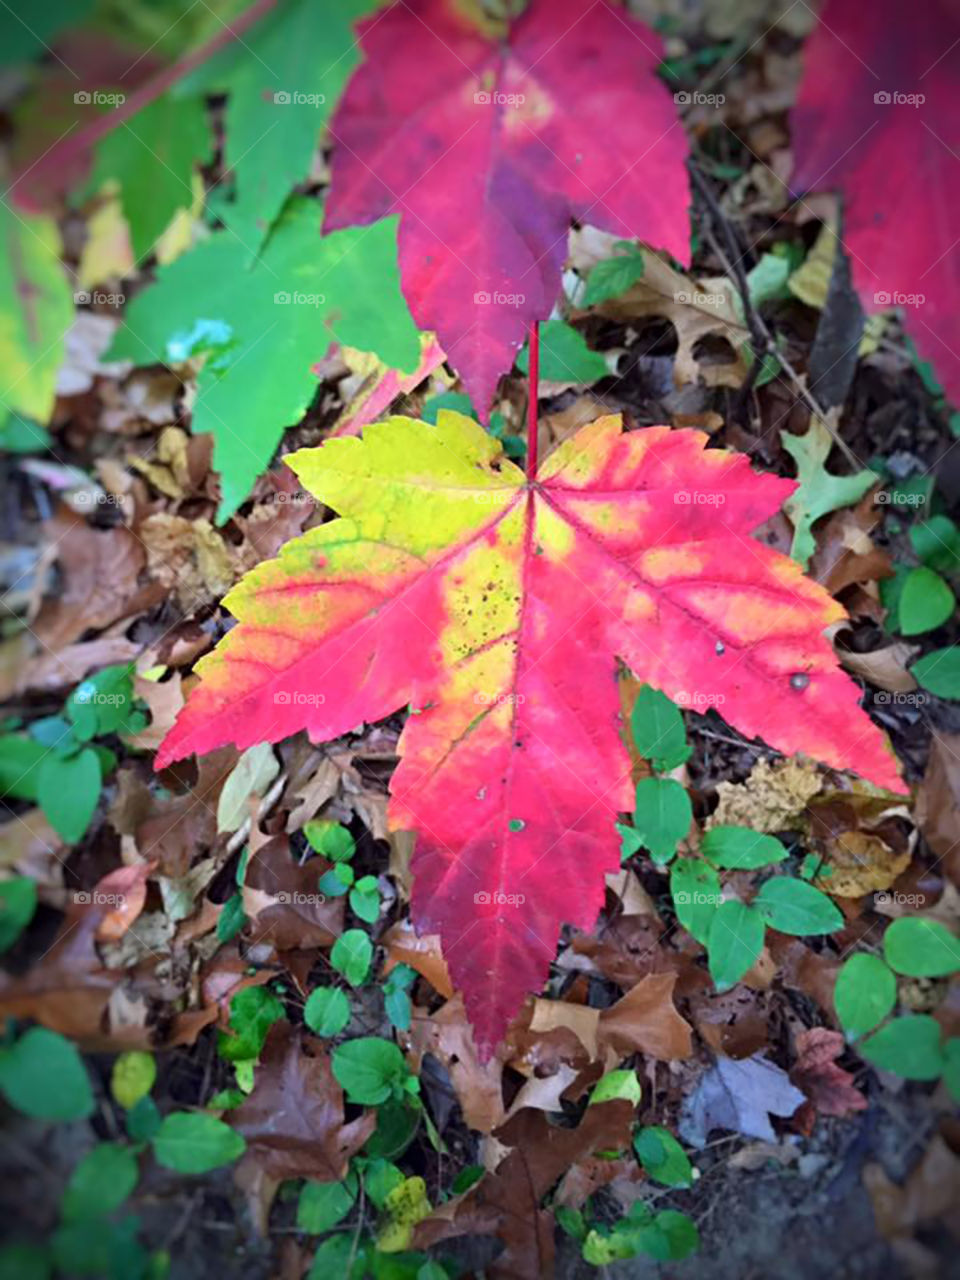 Close up of autumn leaf with red, yellow, and orange. Blurry leaves in the background. 